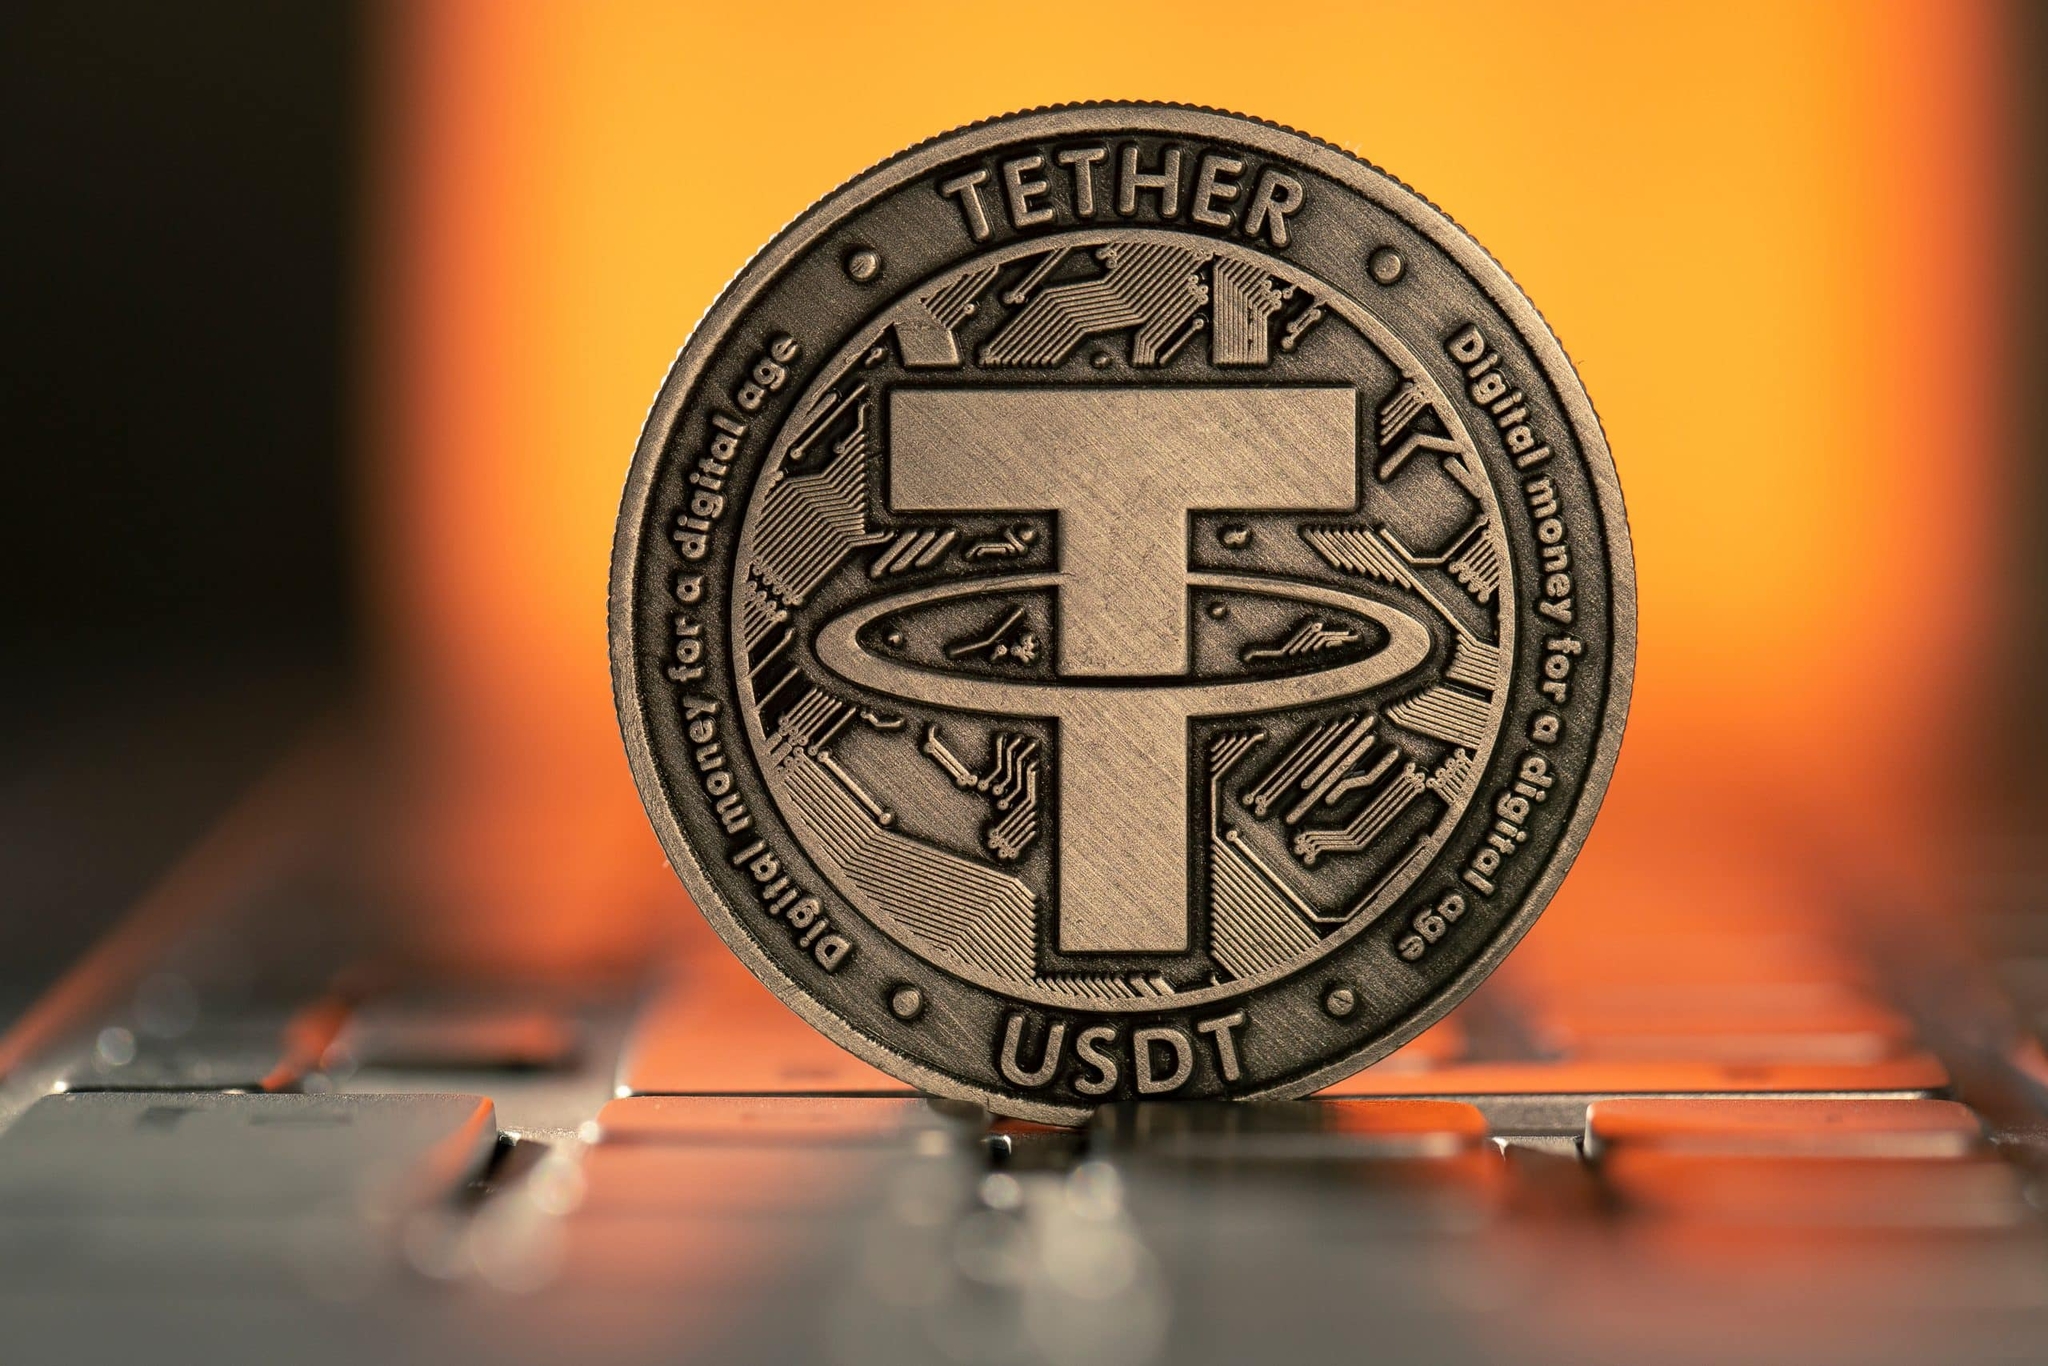 Buy Tether (USDT) with a credit card and debit card Instantly - ChangeHero